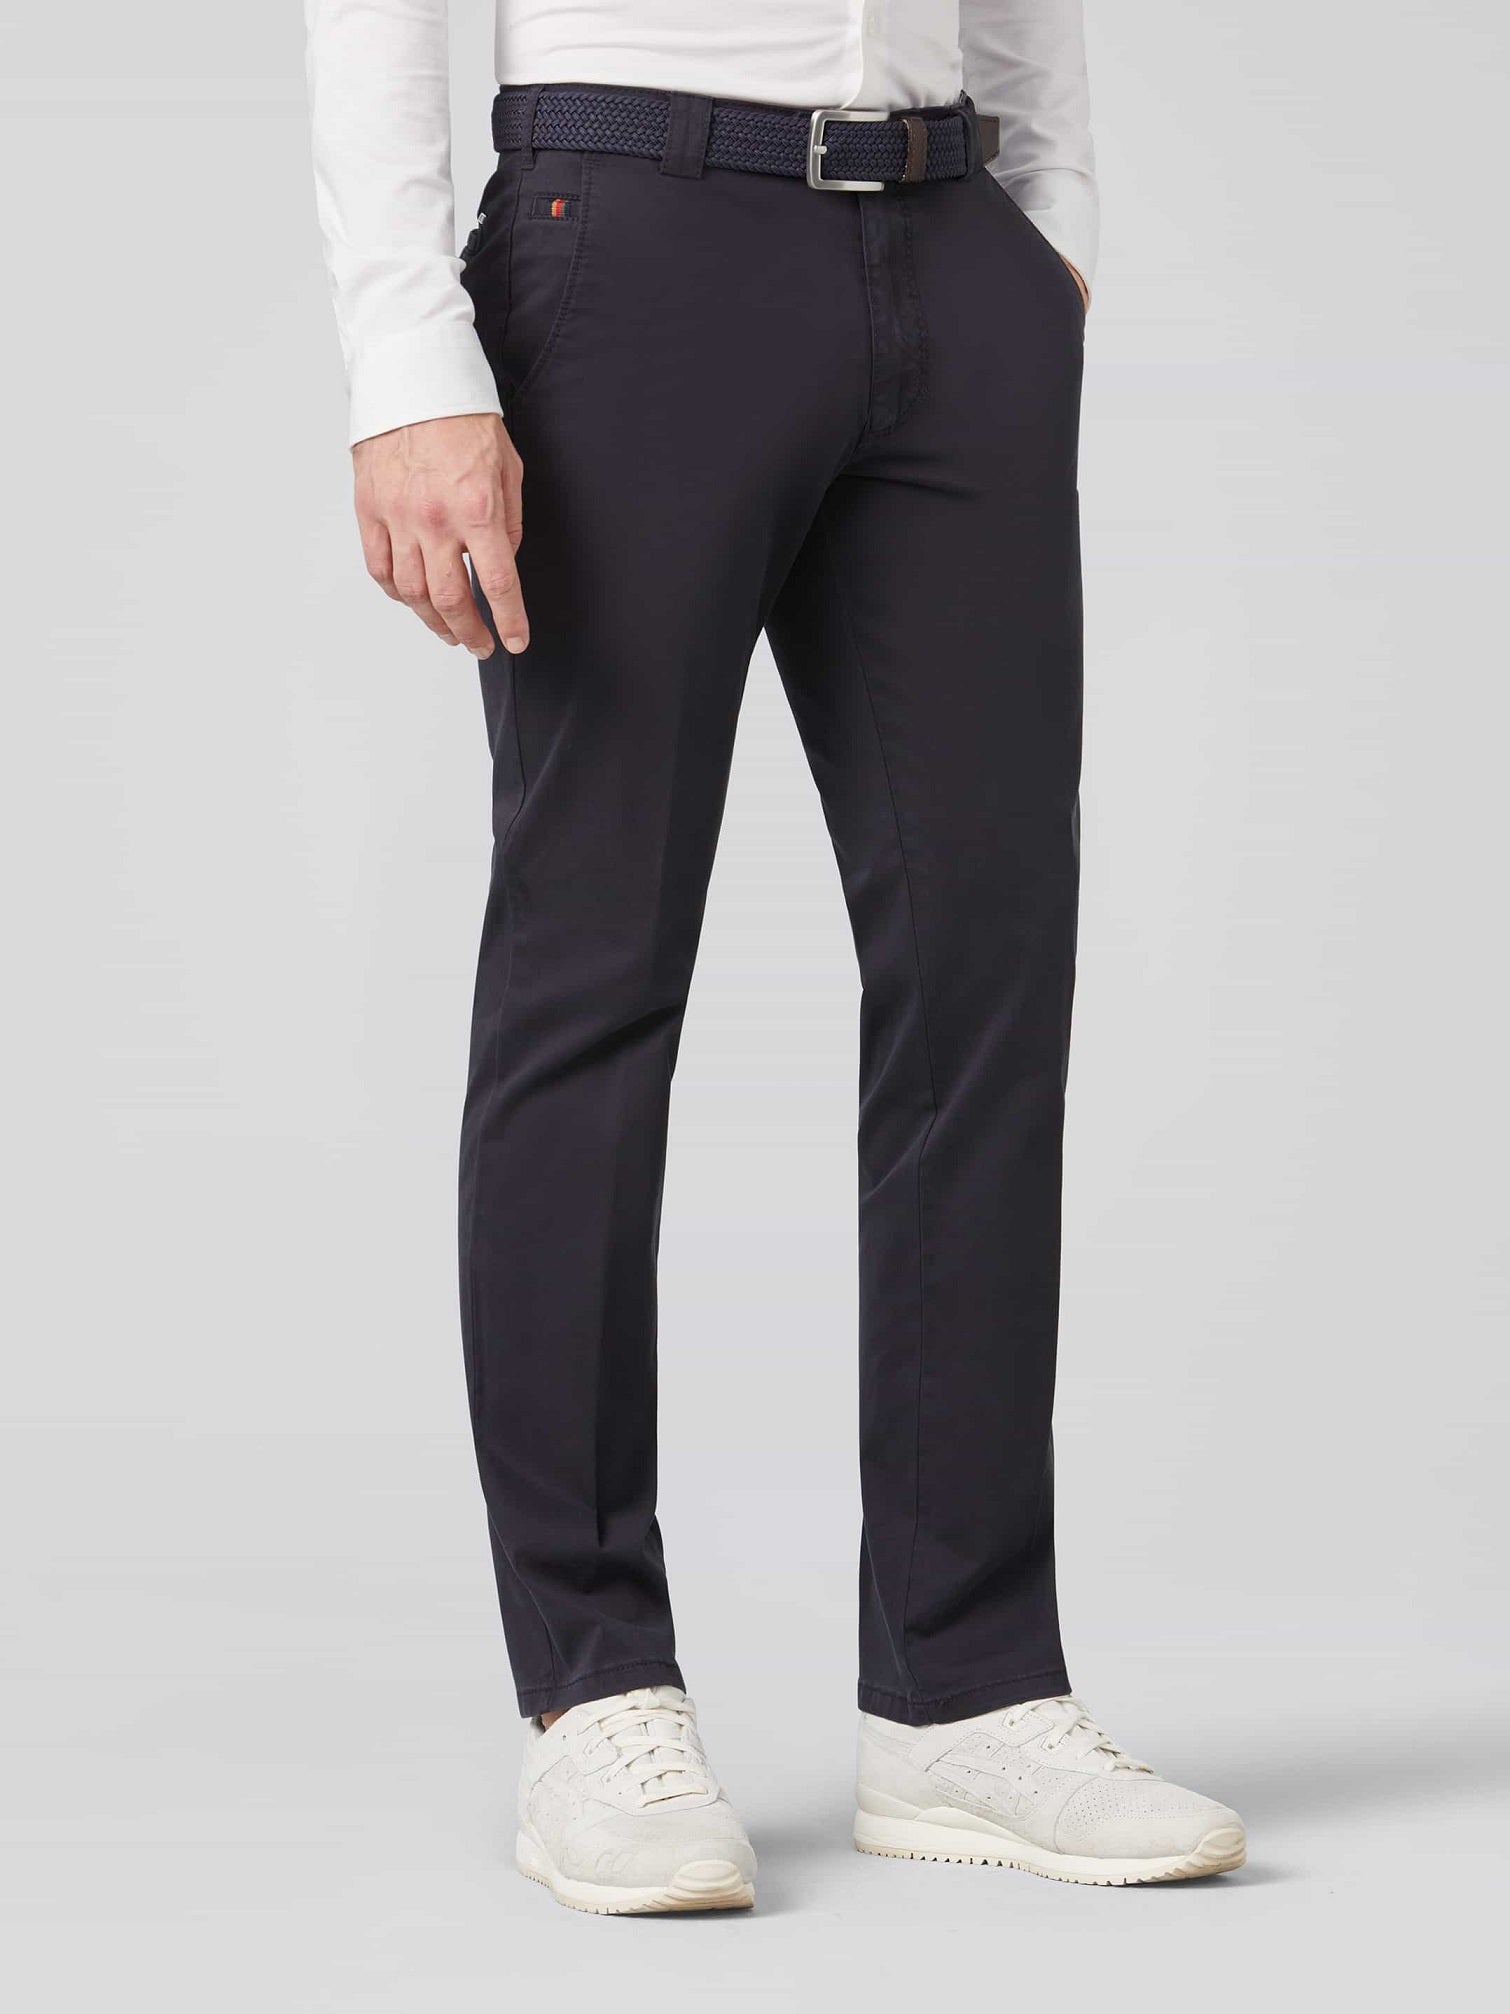 Meyer Trousers Australia MEYER Trousers Adelaide  Tailors of  DistinctionTailors of Distinction